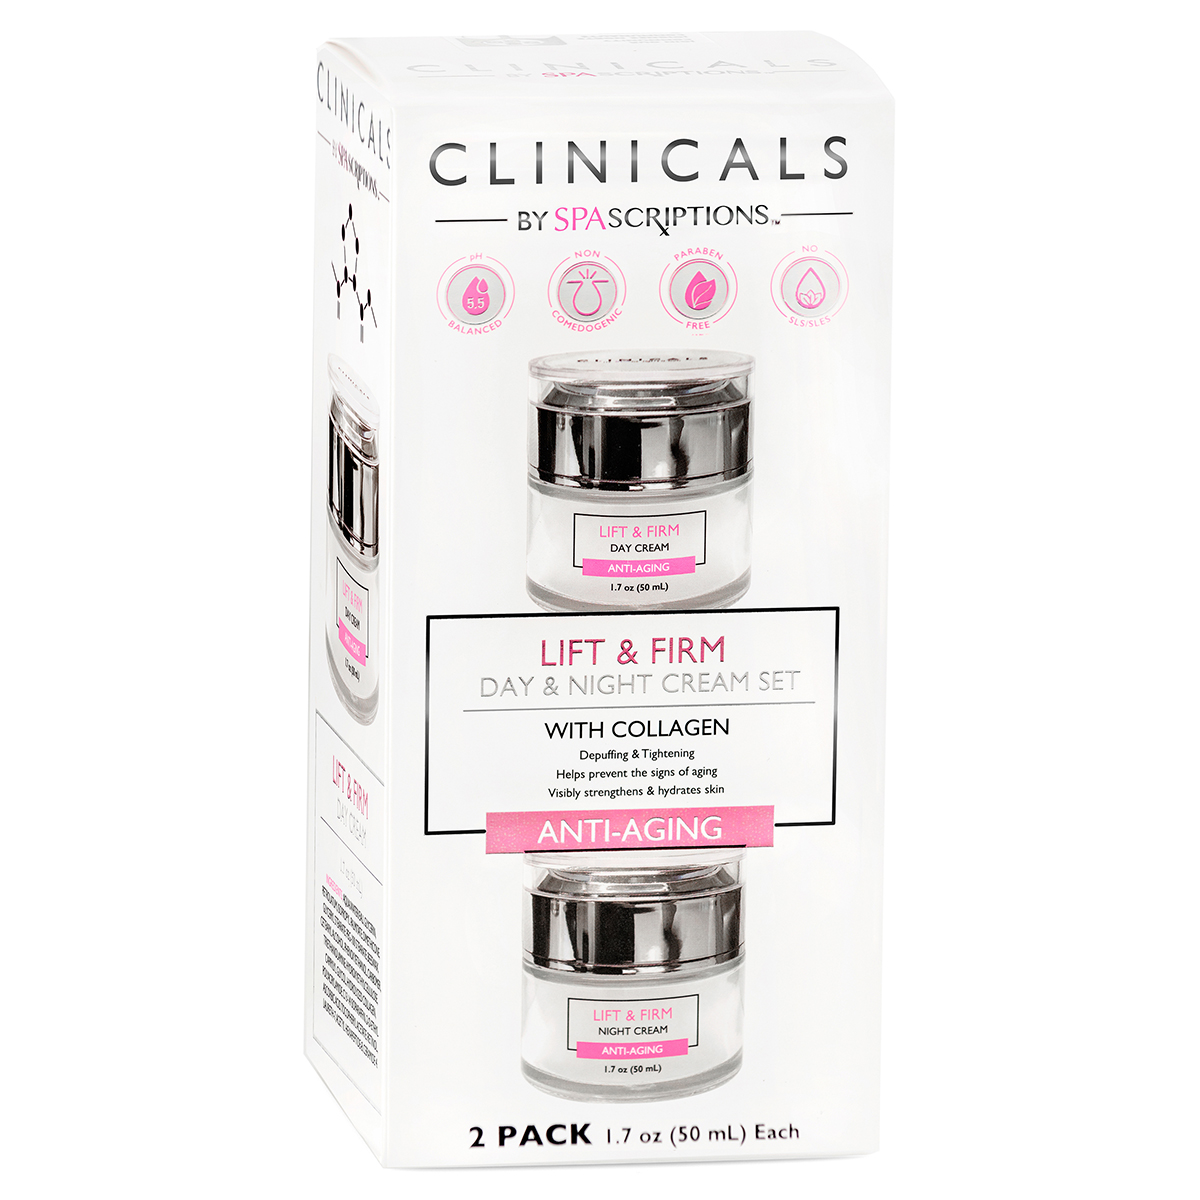 Clinicals By Spascriptions Lift & Firm Day & Night Cream Set